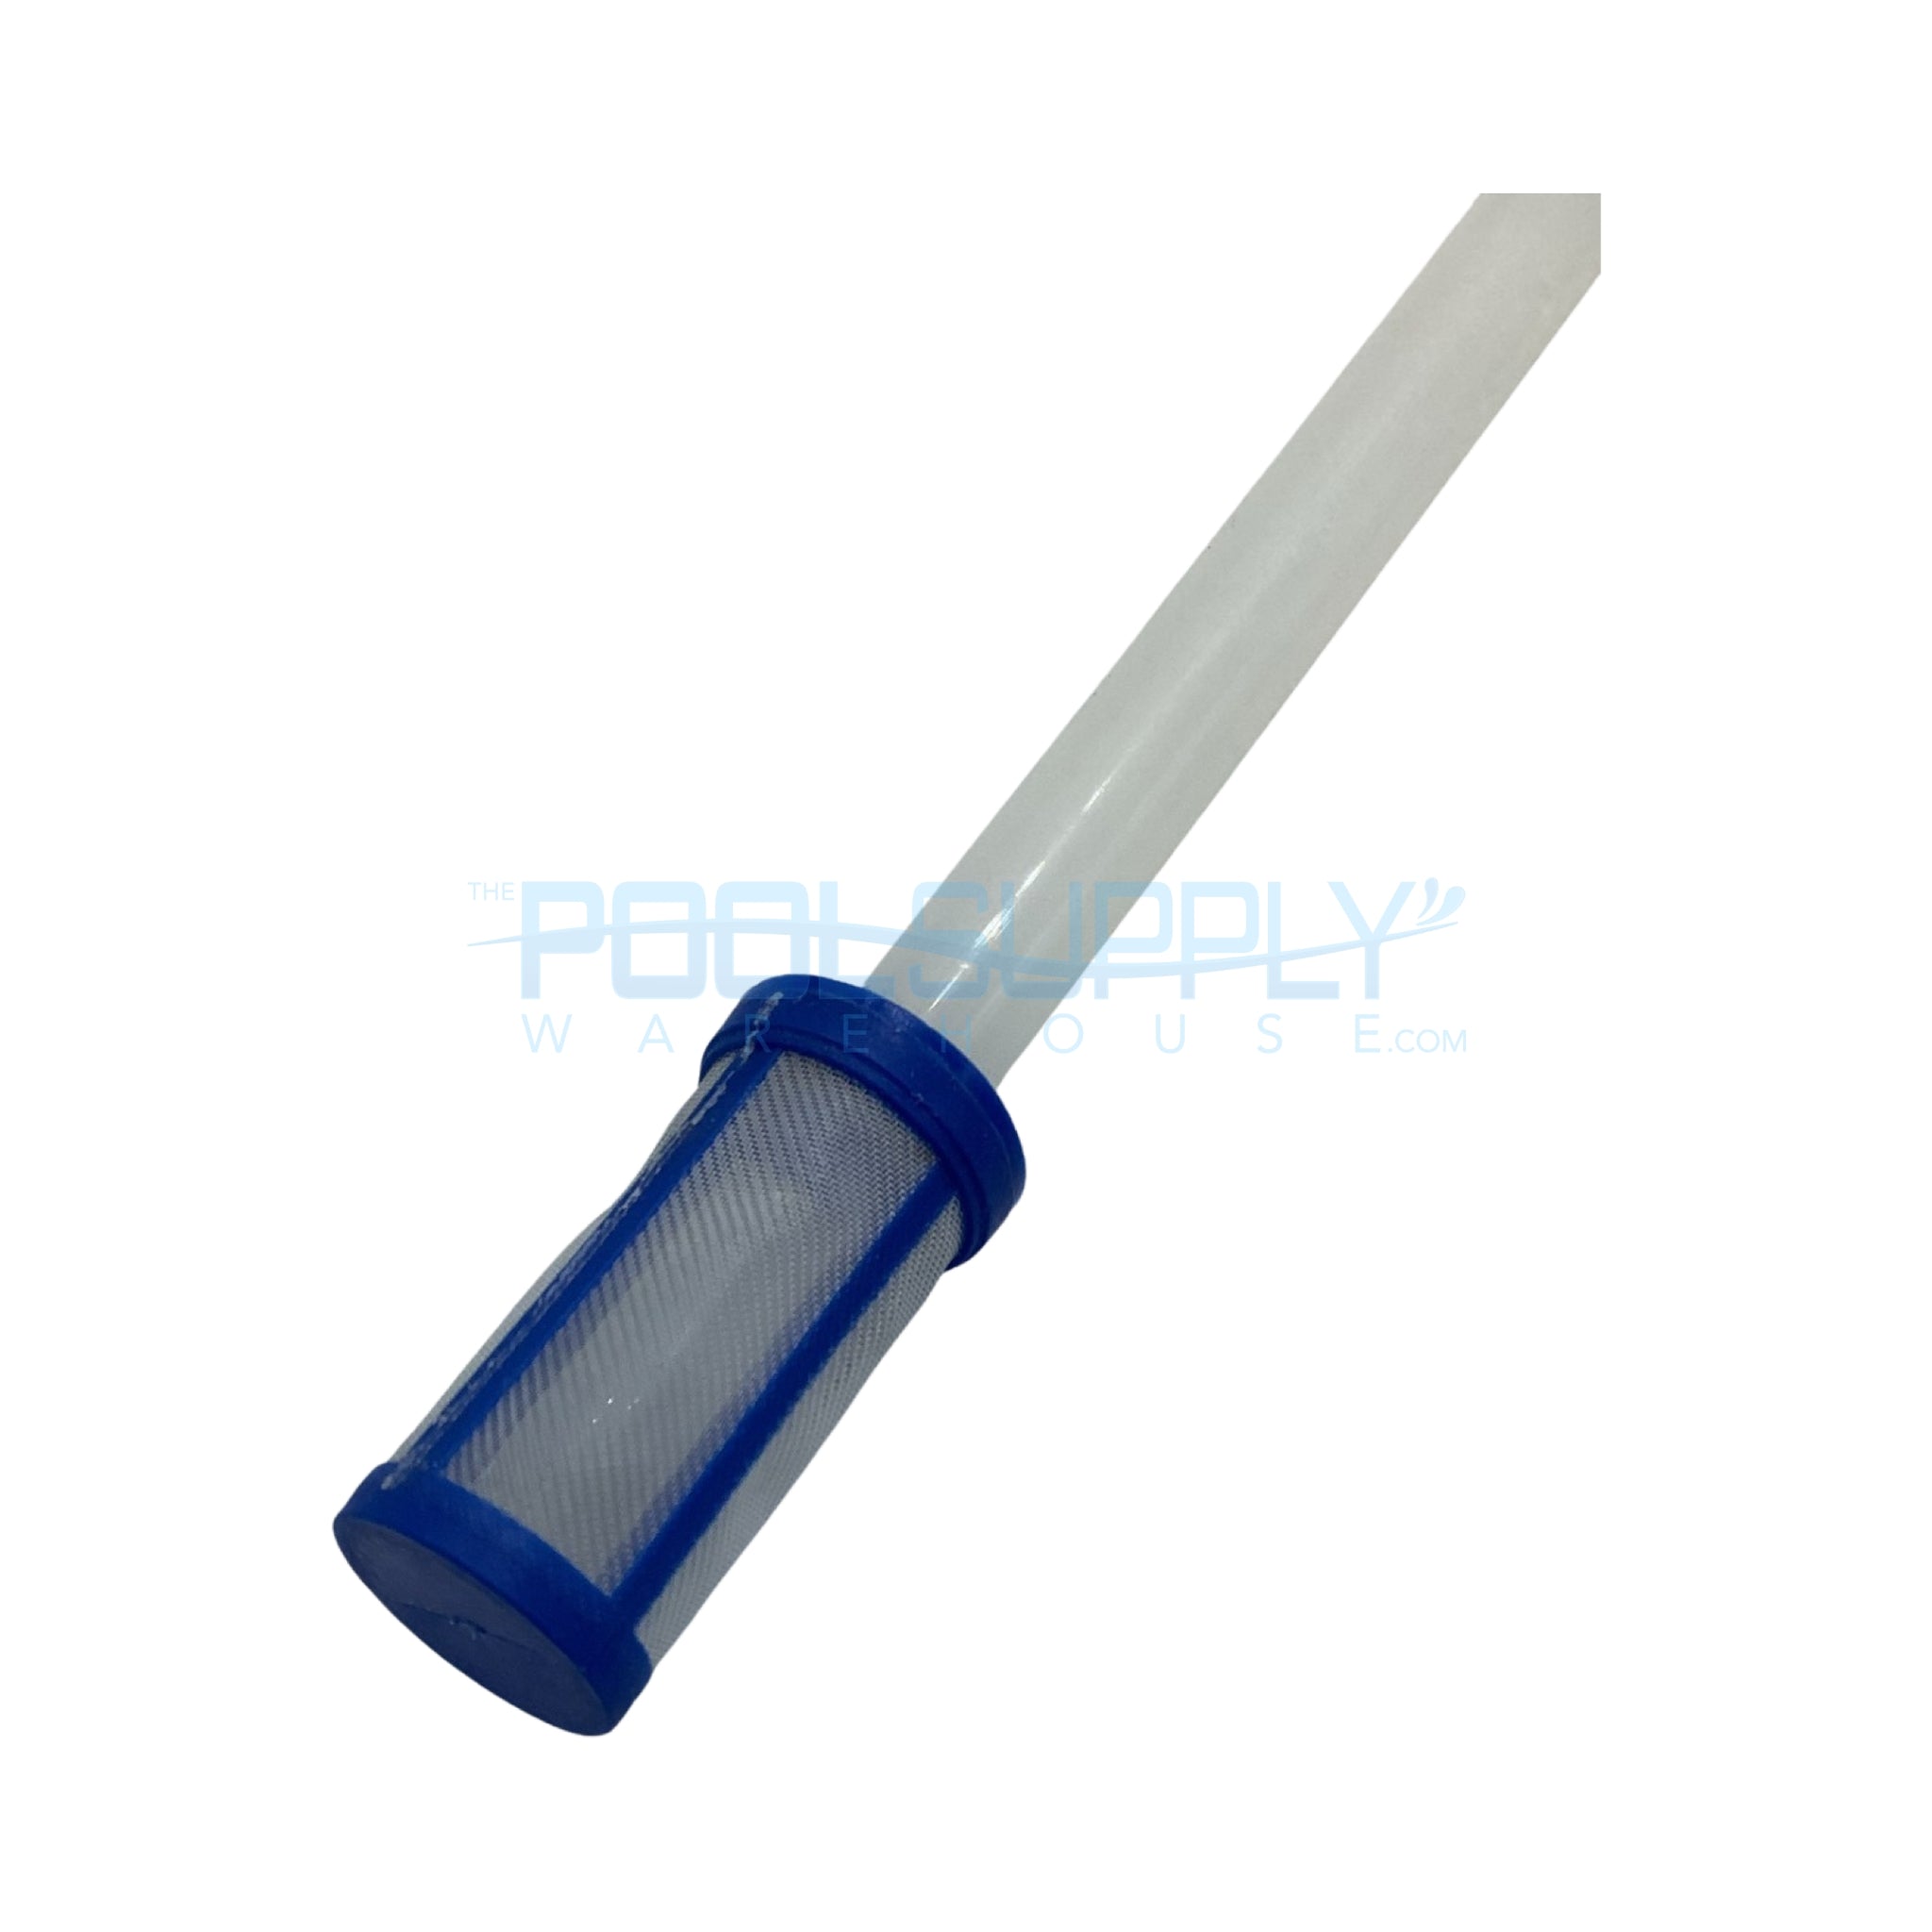 Pentair Air Bleed Assembly - 24800-0120 - The Pool Supply Warehouse